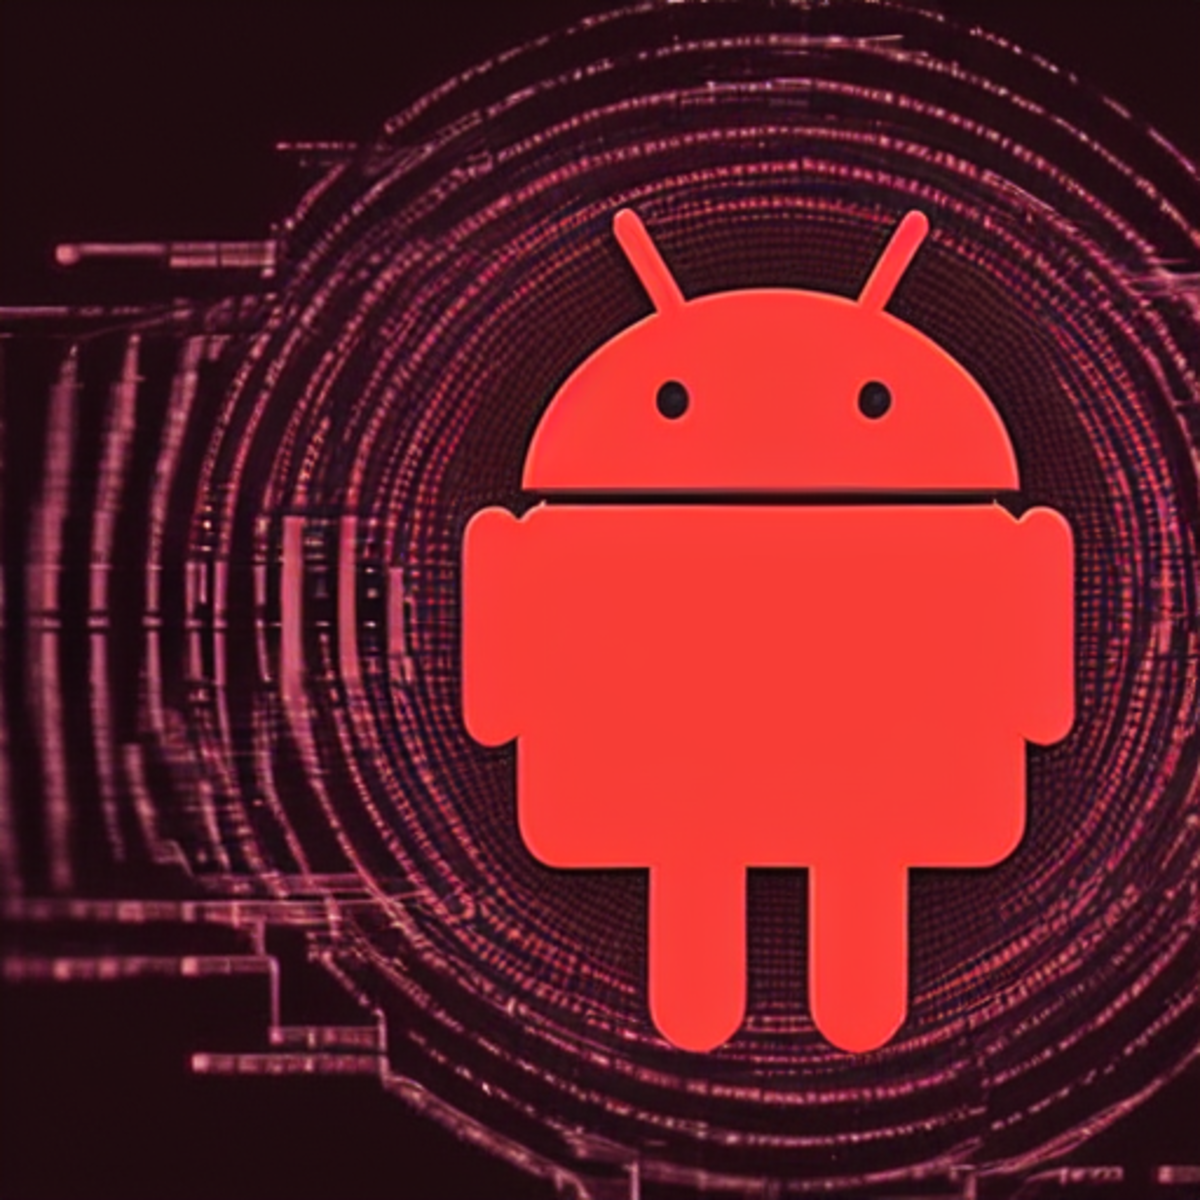 How to Detect and Remove Malware From Your Android: A Quick Guide